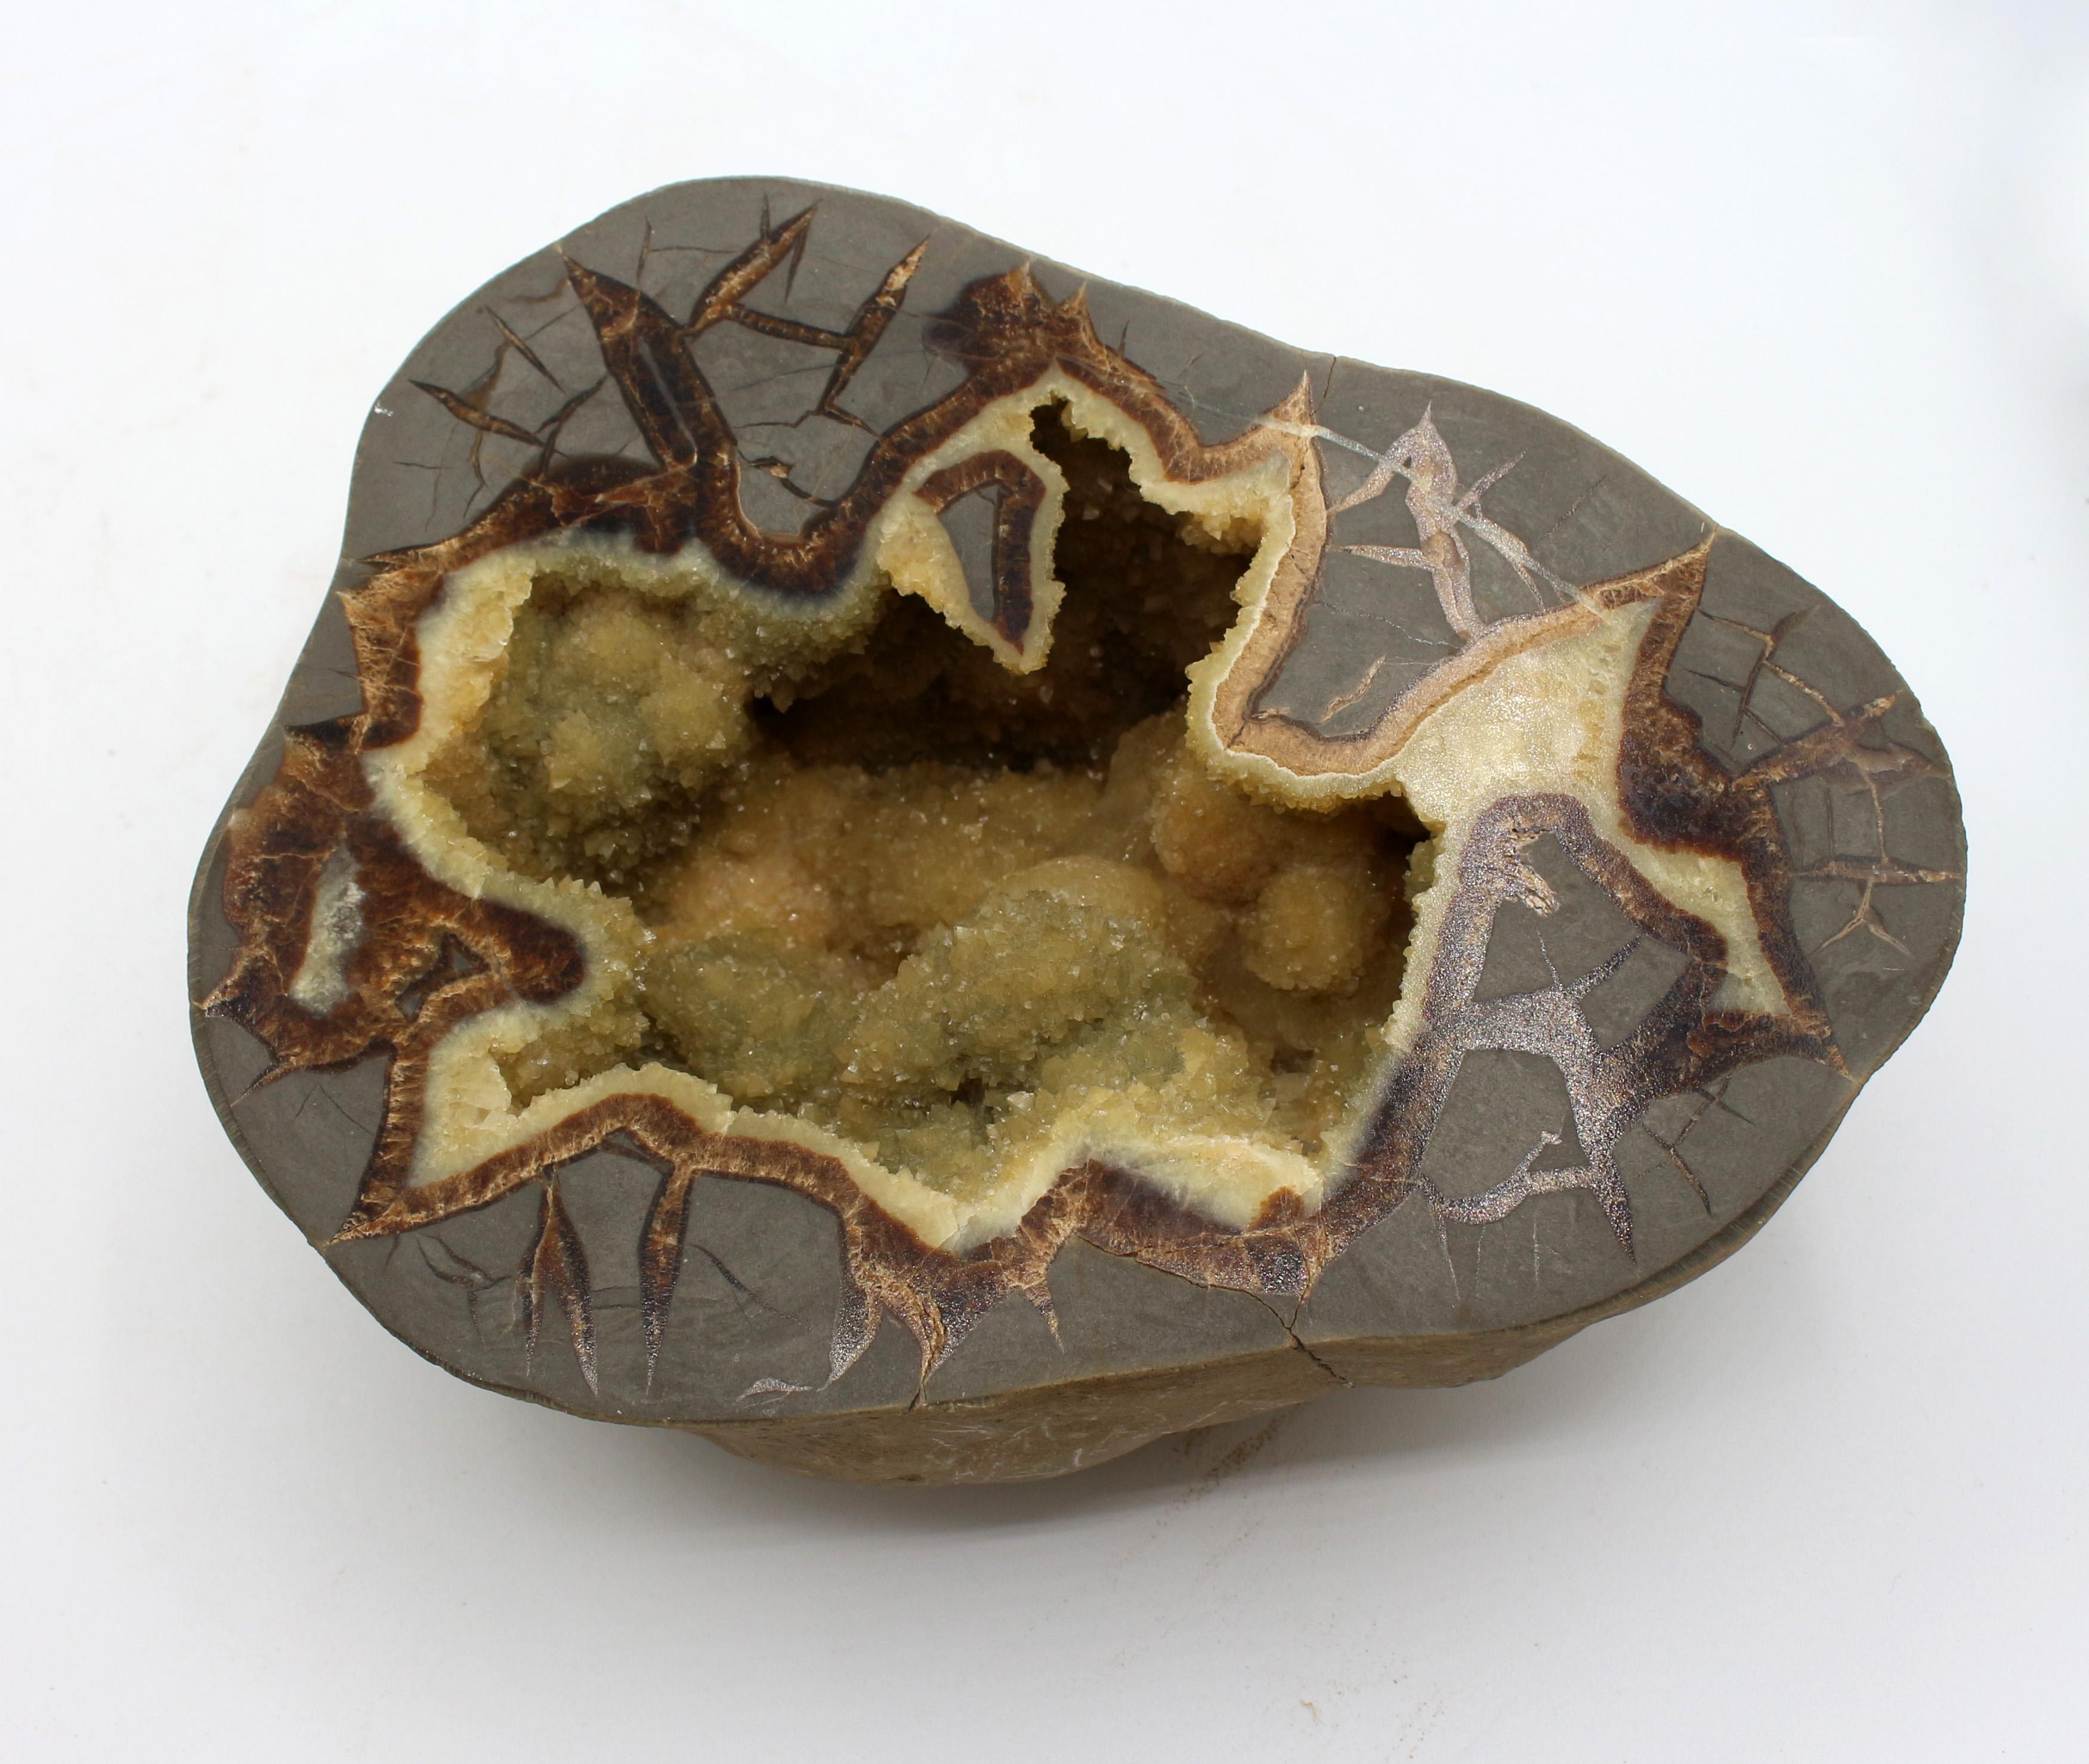 A Cretaceous period calcite septarian nodule, from Utah, resting on custom marble & brass plated stand. Exceptional crystaline interior shapes. Mid century modern stand (resting on, not attached!). Note on base: Sea Bottom Chalk Nodule, Cretaceous